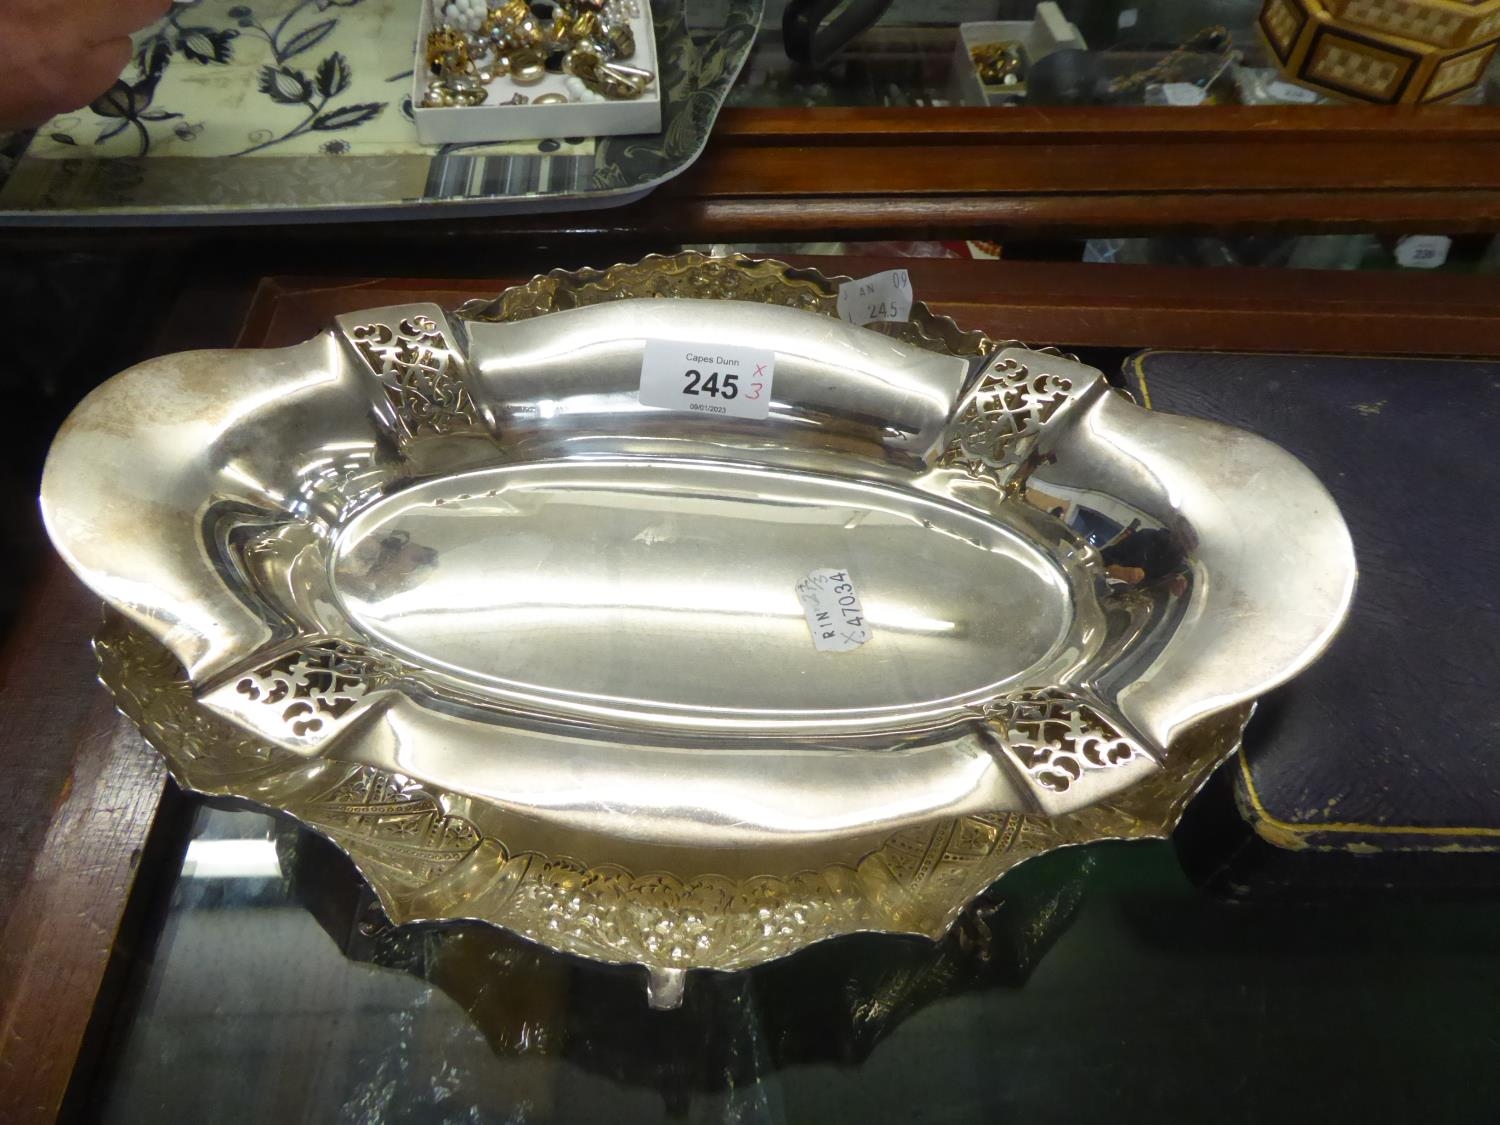 AN EP OVAL FRUIT BOWL, THE FLUTED SIDES REPOUSSE WITH ALTERNATE DIAPER AND FLORAL PANELS AND